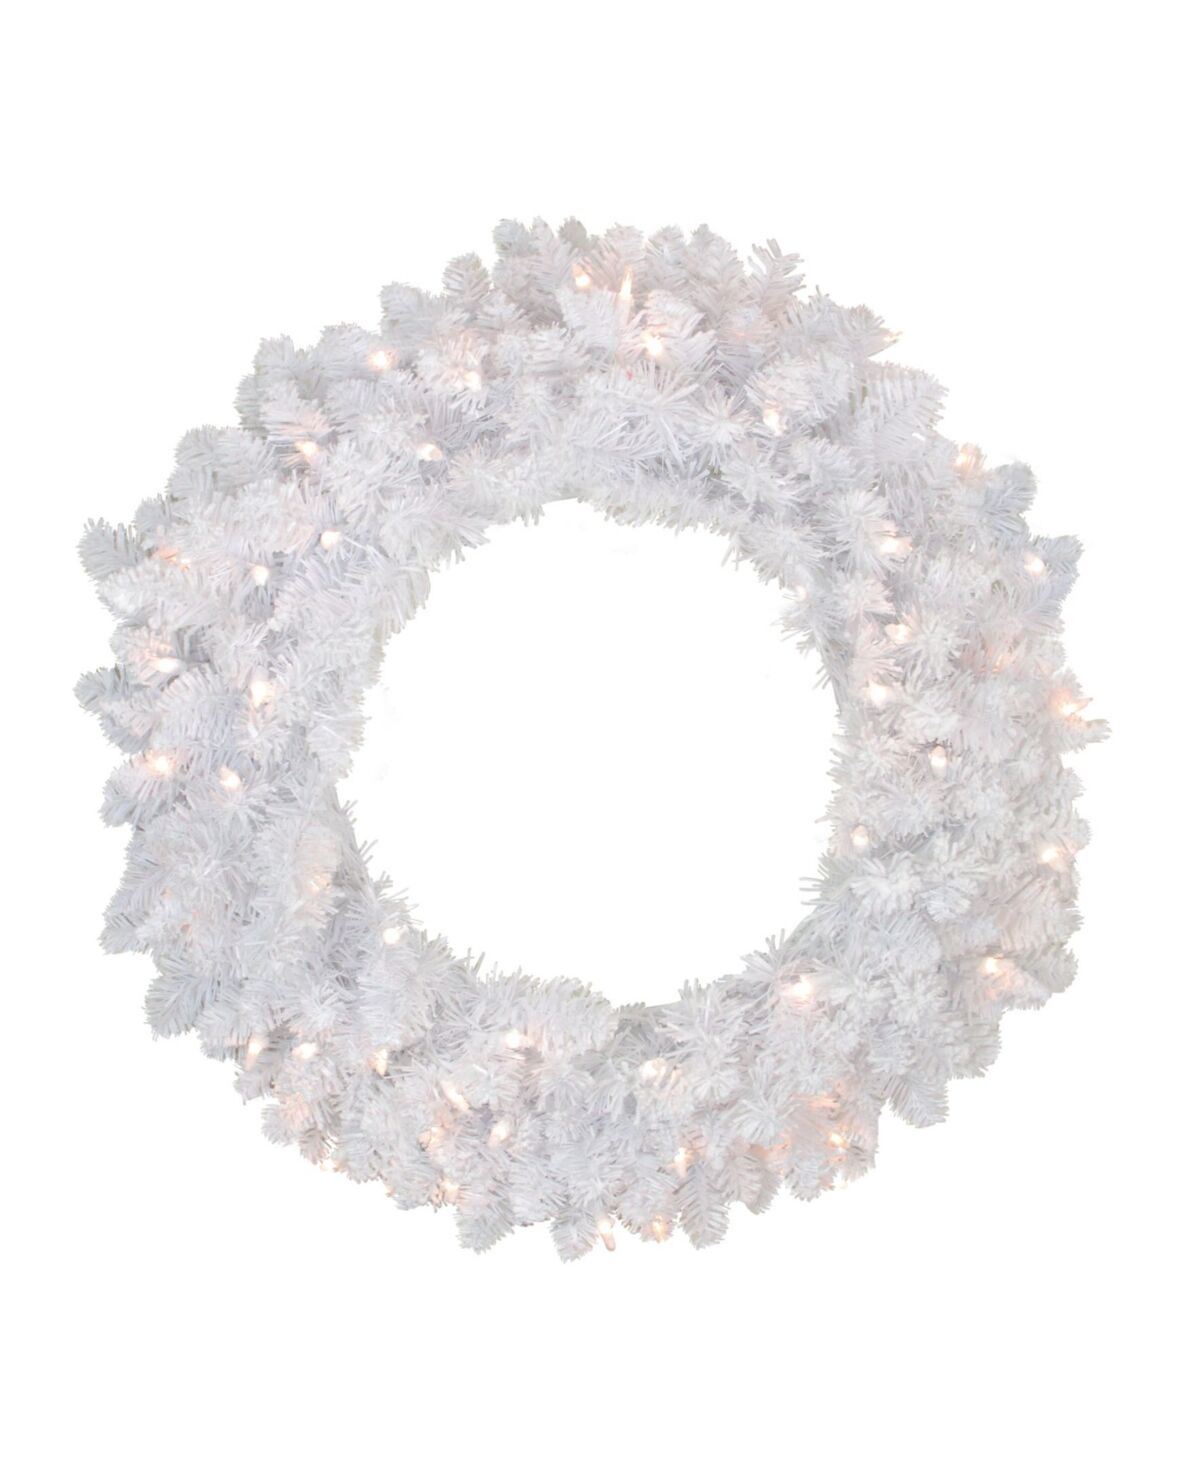 Northlight Pre-Lit Flocked Snow White Artificial Christmas Wreath - 36-Inch Clear Lights - White